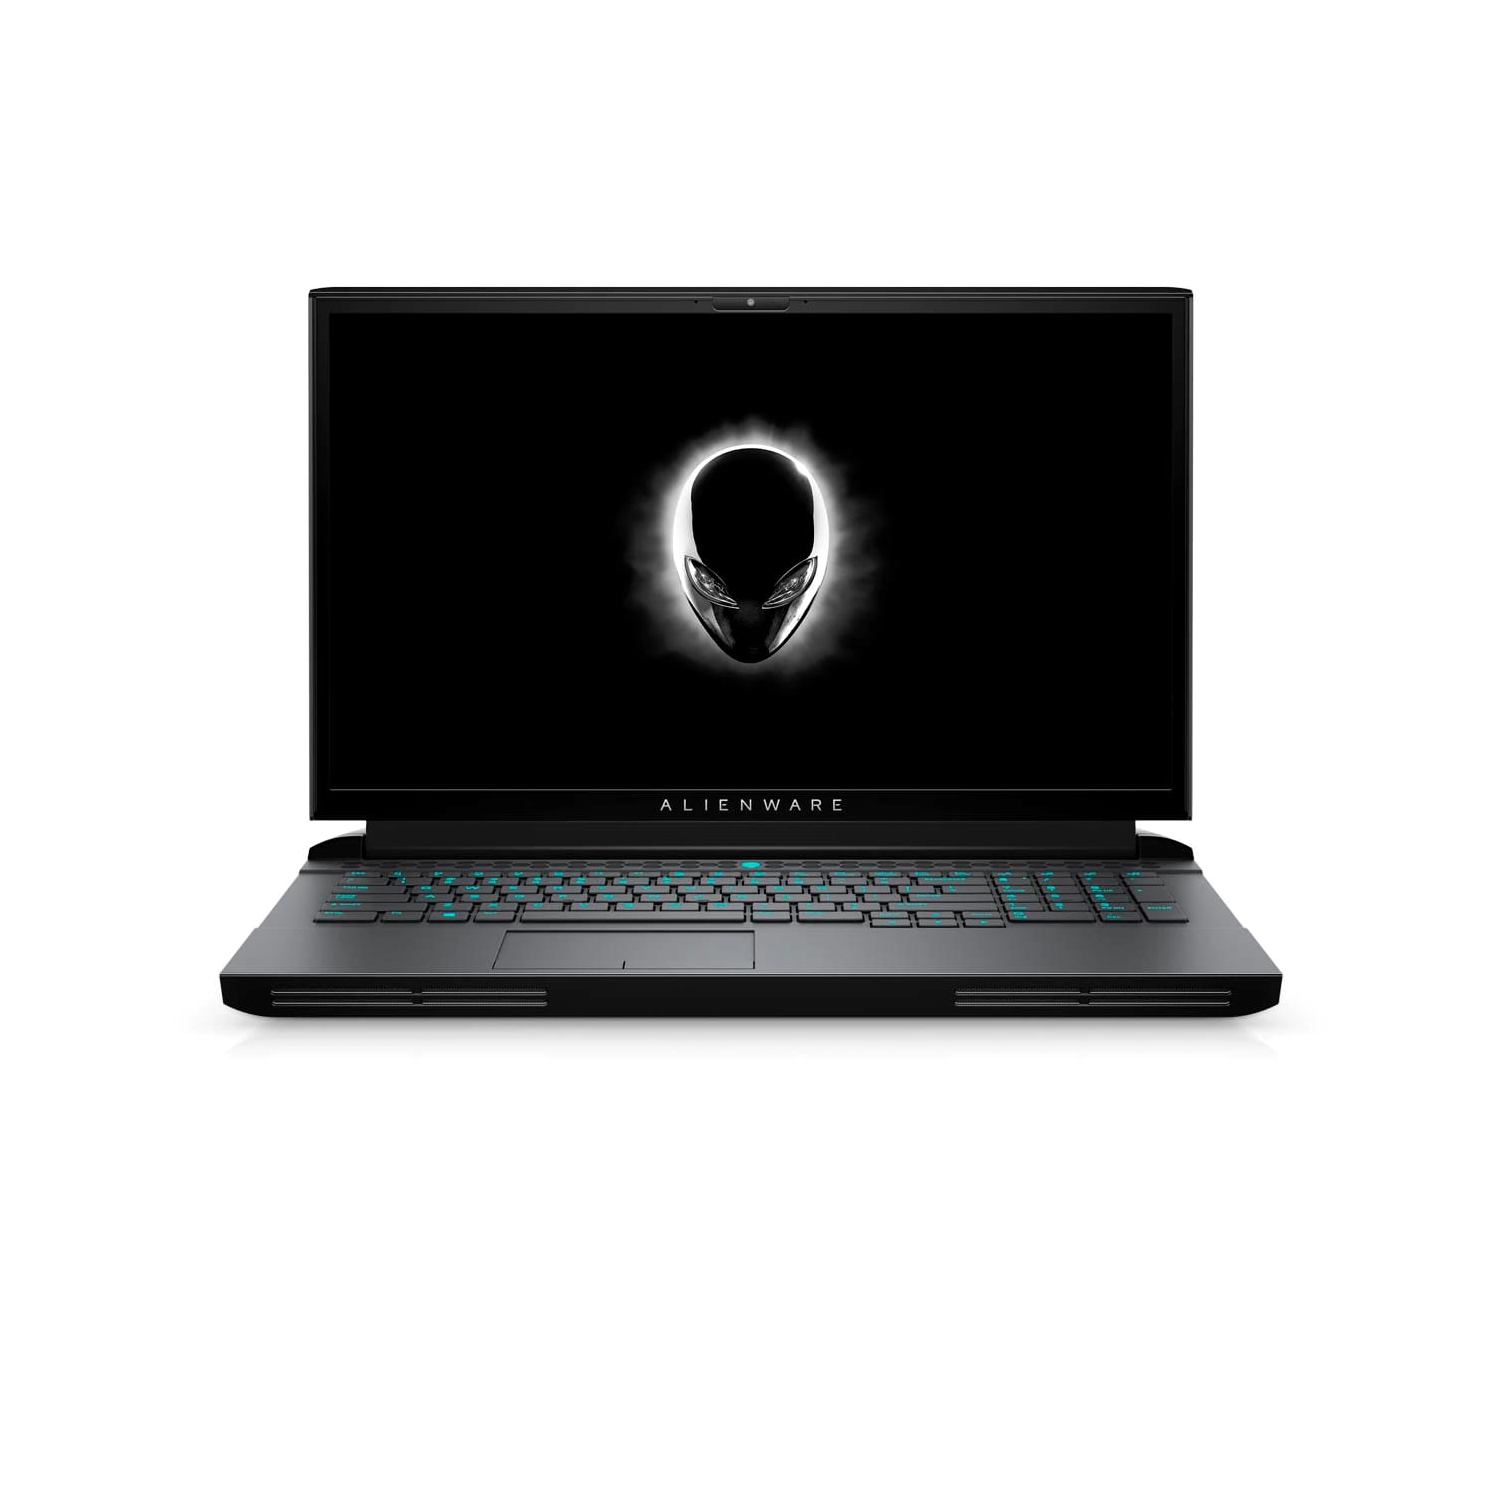 Refurbished (Excellent) - Dell Alienware 17 51m R2 Gaming Laptop (2020), 17.3" FHD, Core i7 - 1TB HDD + 256GB SSD - 32GB RAM - RTX 2060, 4.8 GHz - 10th Gen CPU Certified